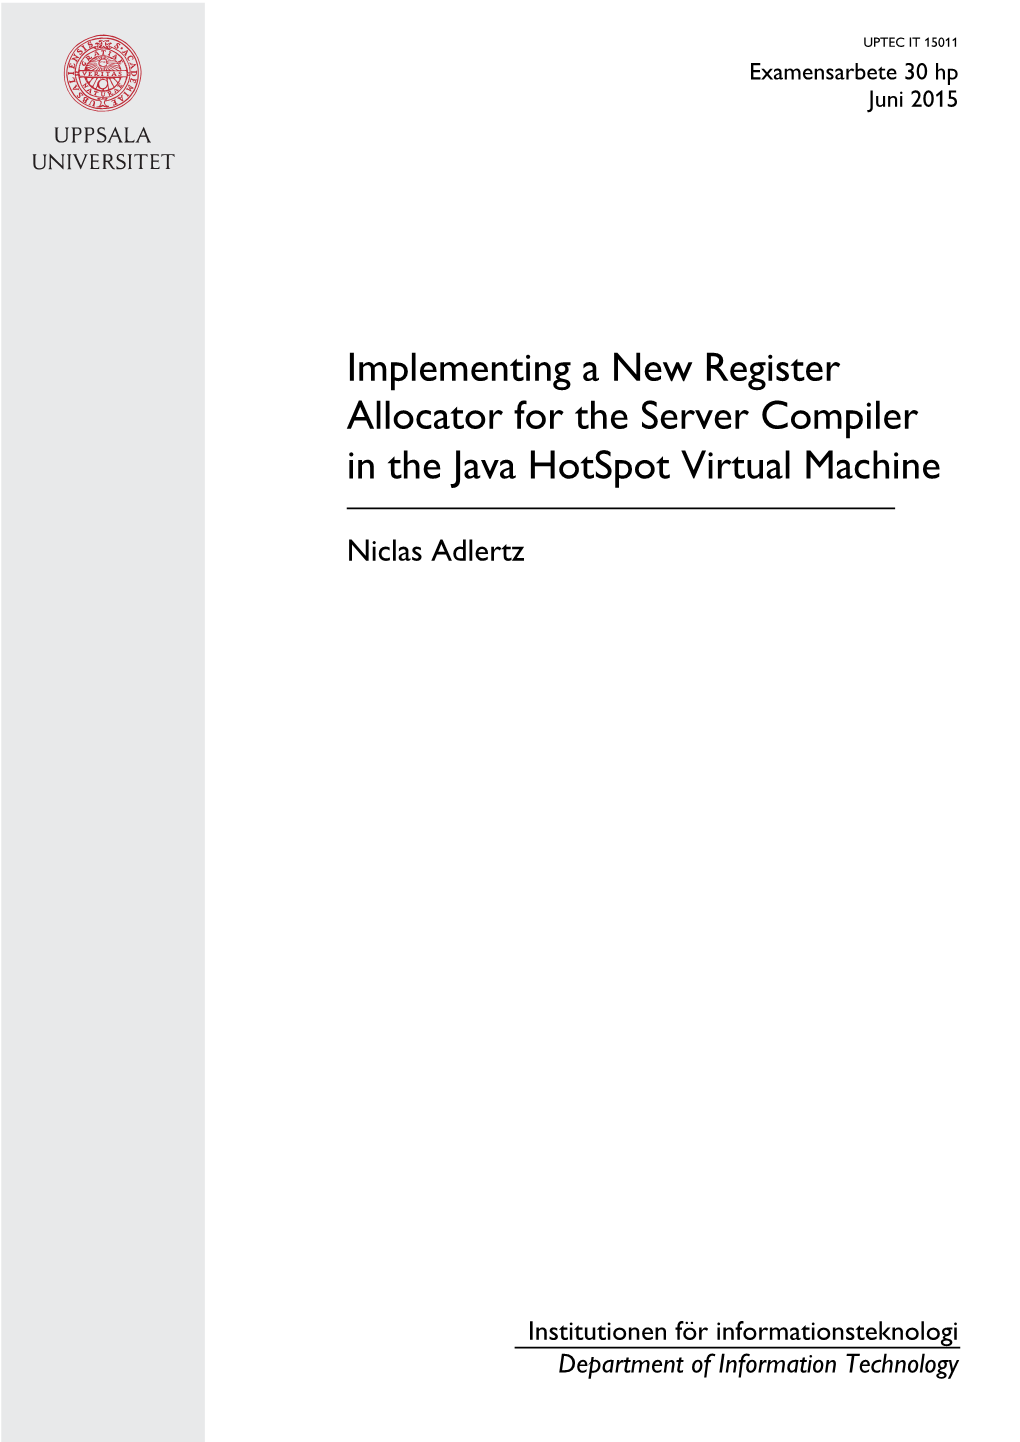 Implementing a New Register Allocator for the Server Compiler in the Java Hotspot Virtual Machine